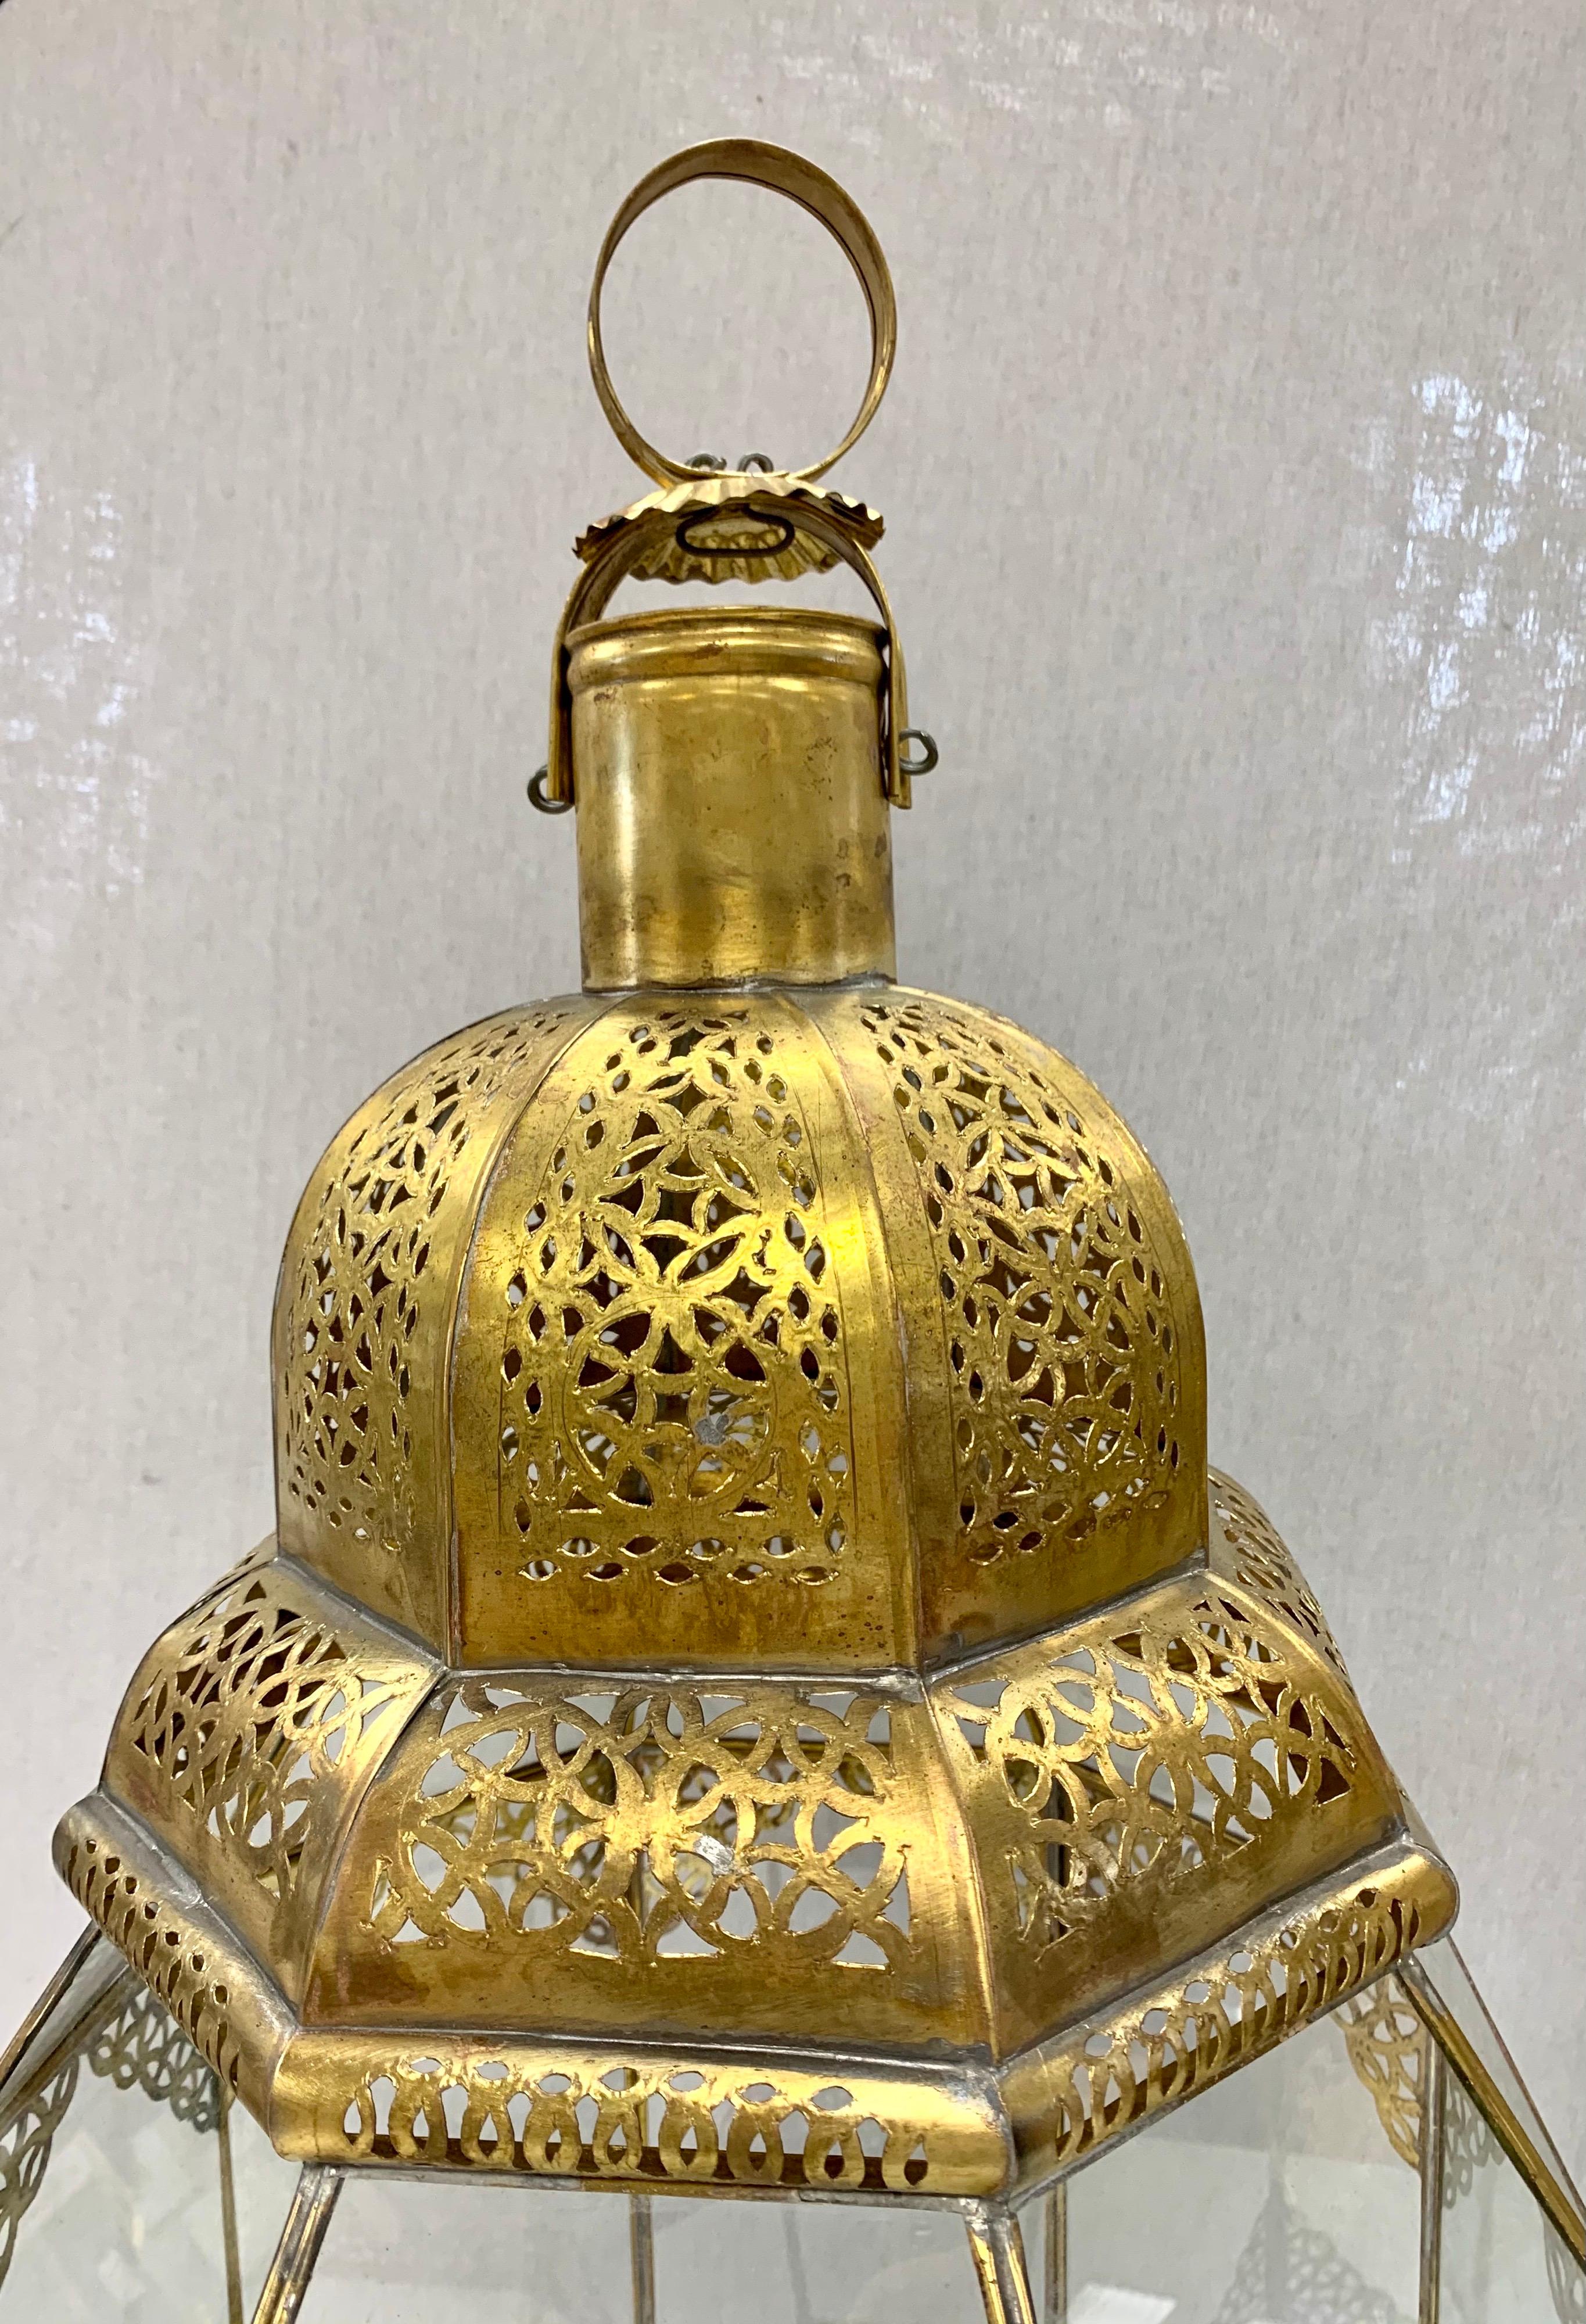 Exquisite Moorish brass and glass lanterns with beautiful intricate brass filigree have eight sides with one side having a door to access the inside. Handcrafted in Morocco in the 1990s. They can be used hanging from the ceiling, or sitting on a